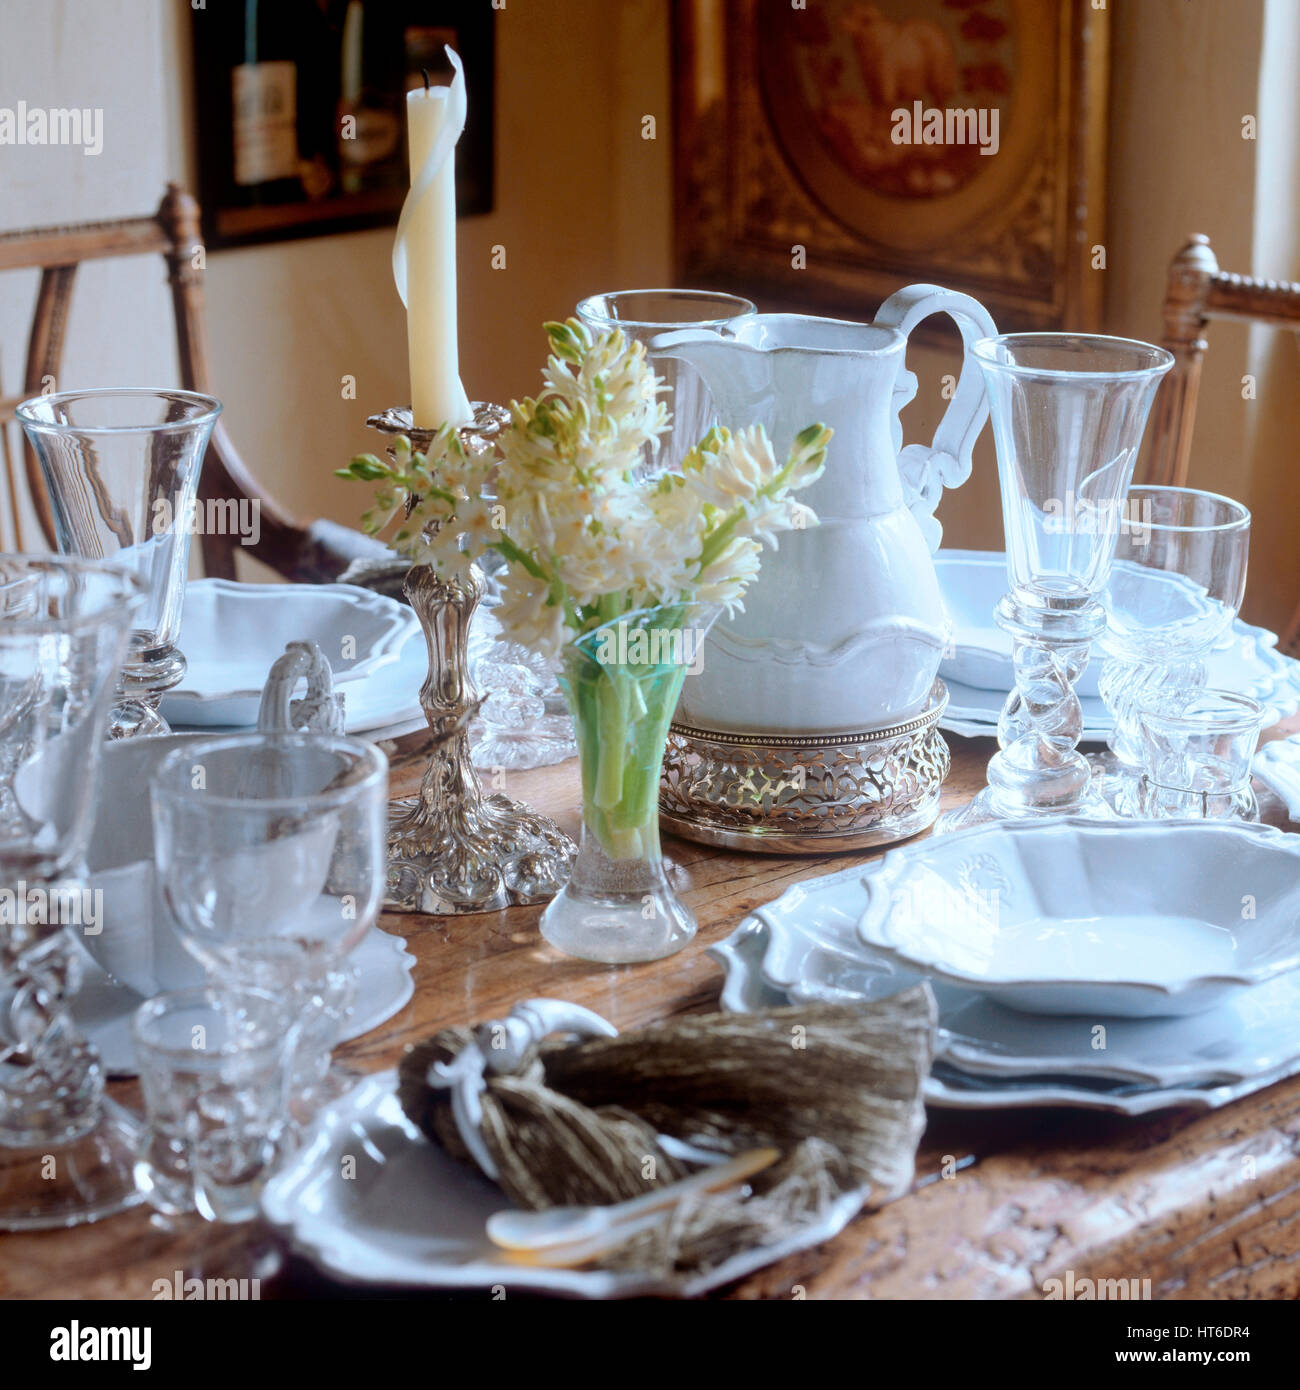 Dining table. Stock Photo